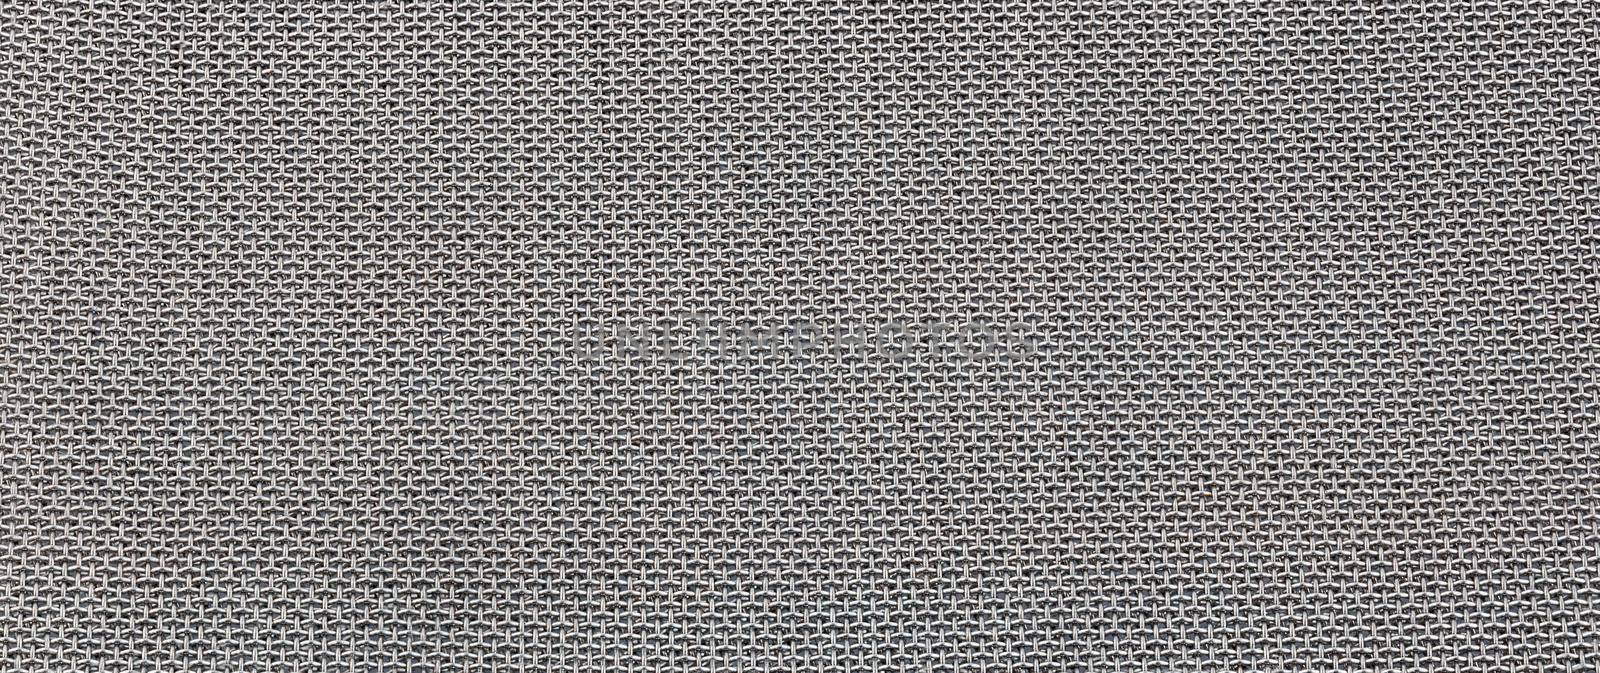 flat tiny double layered stainless steel grid - macro background by z1b